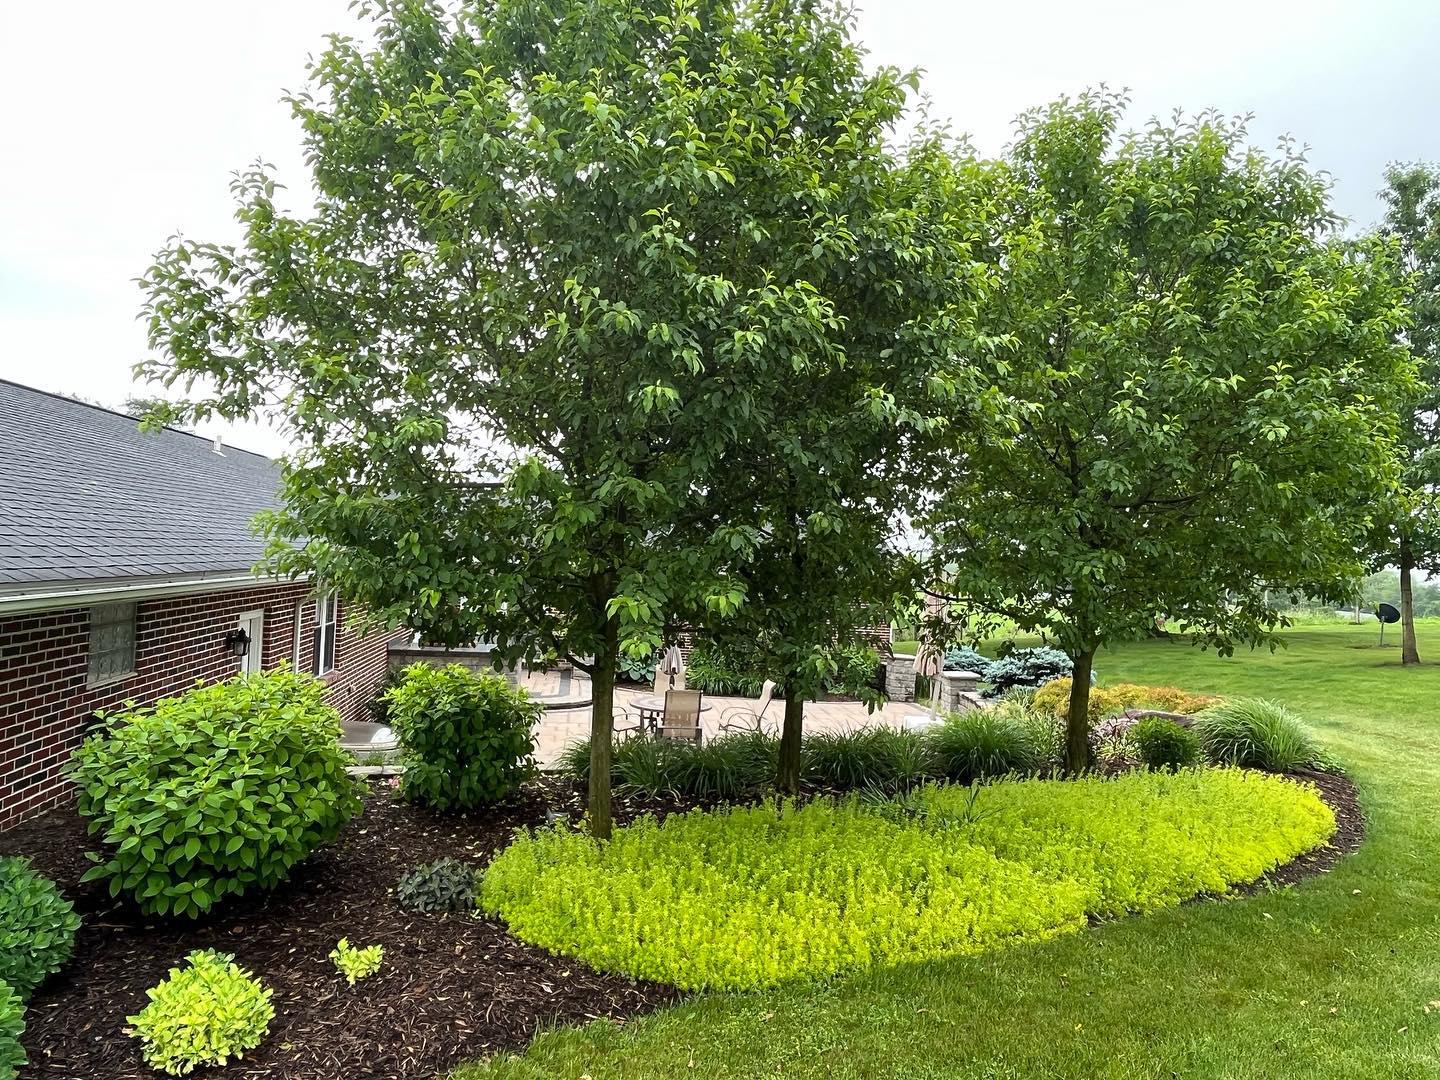 After receiving a landscape design construction degree, and interning with a landscape company in Oregon, he returned to Ohio to put his eclectic background to work.